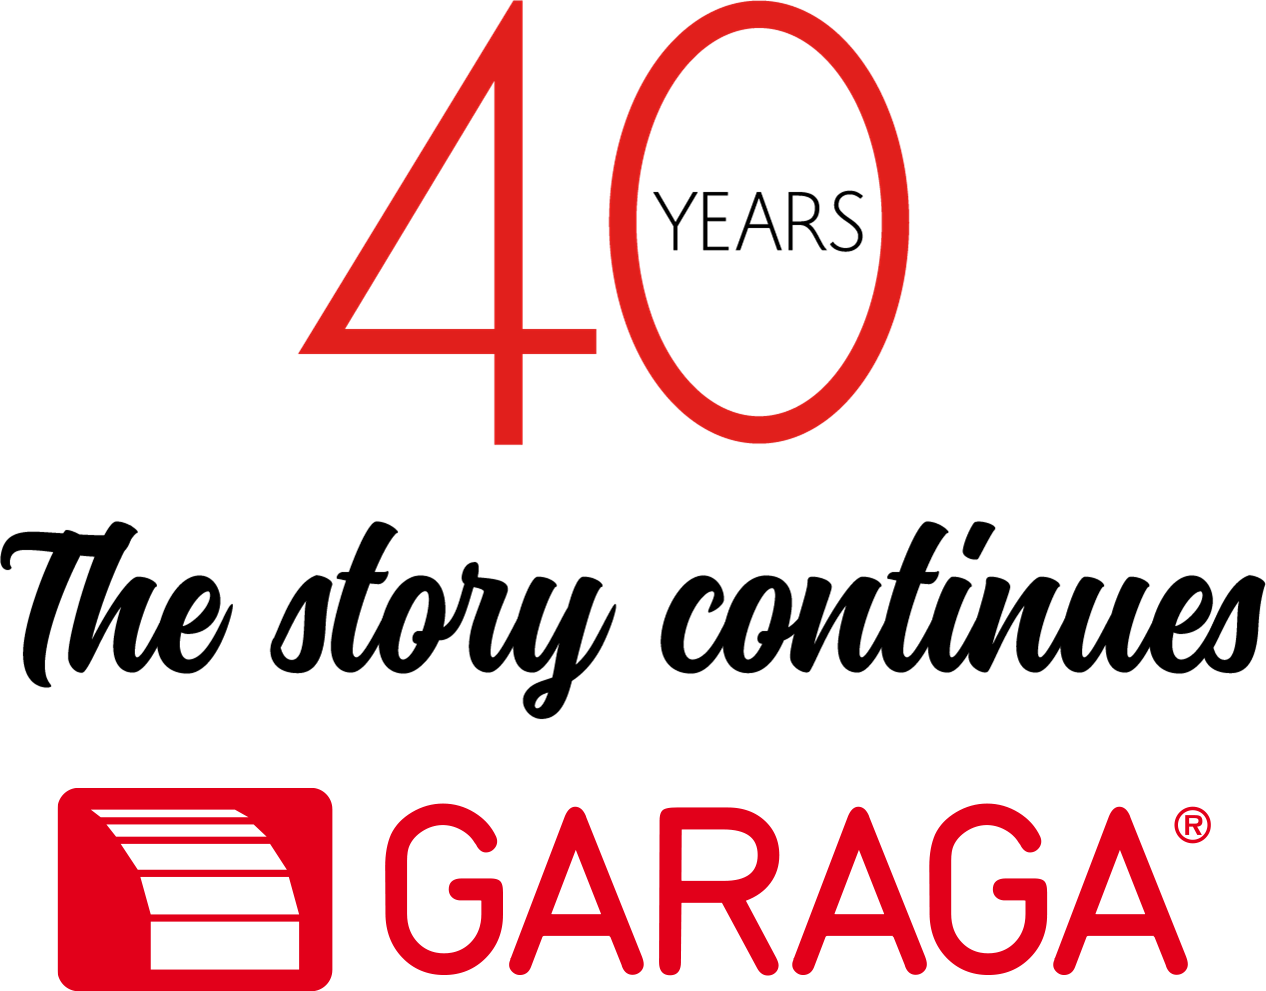 40 years, The story continues with Garaga logo